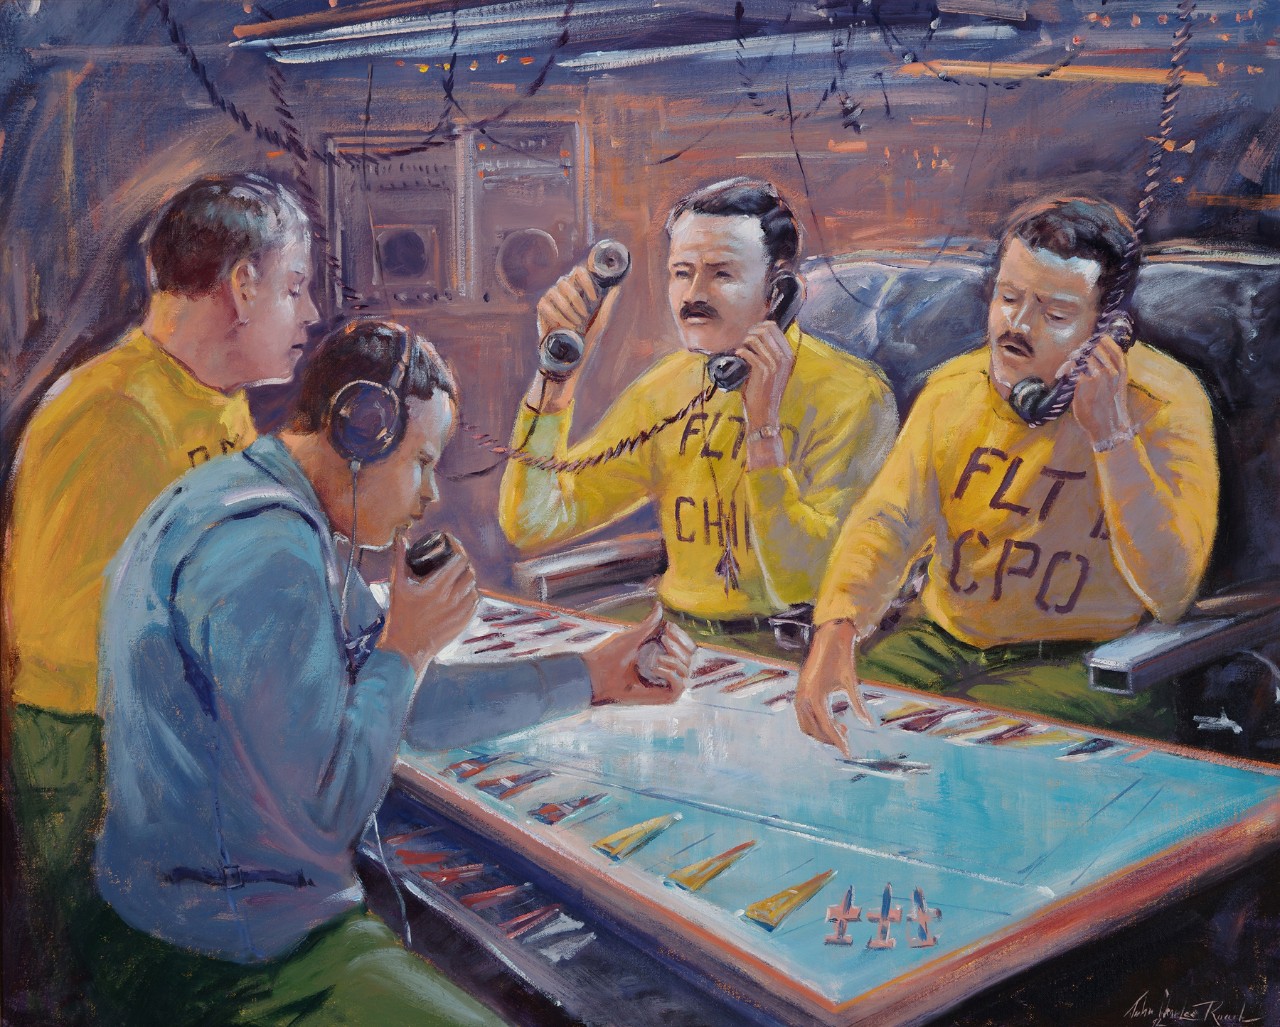 Four men at a table; three are wearing yellow shirts, two are talking into phones, one man wearing a blue shirt as a headset.